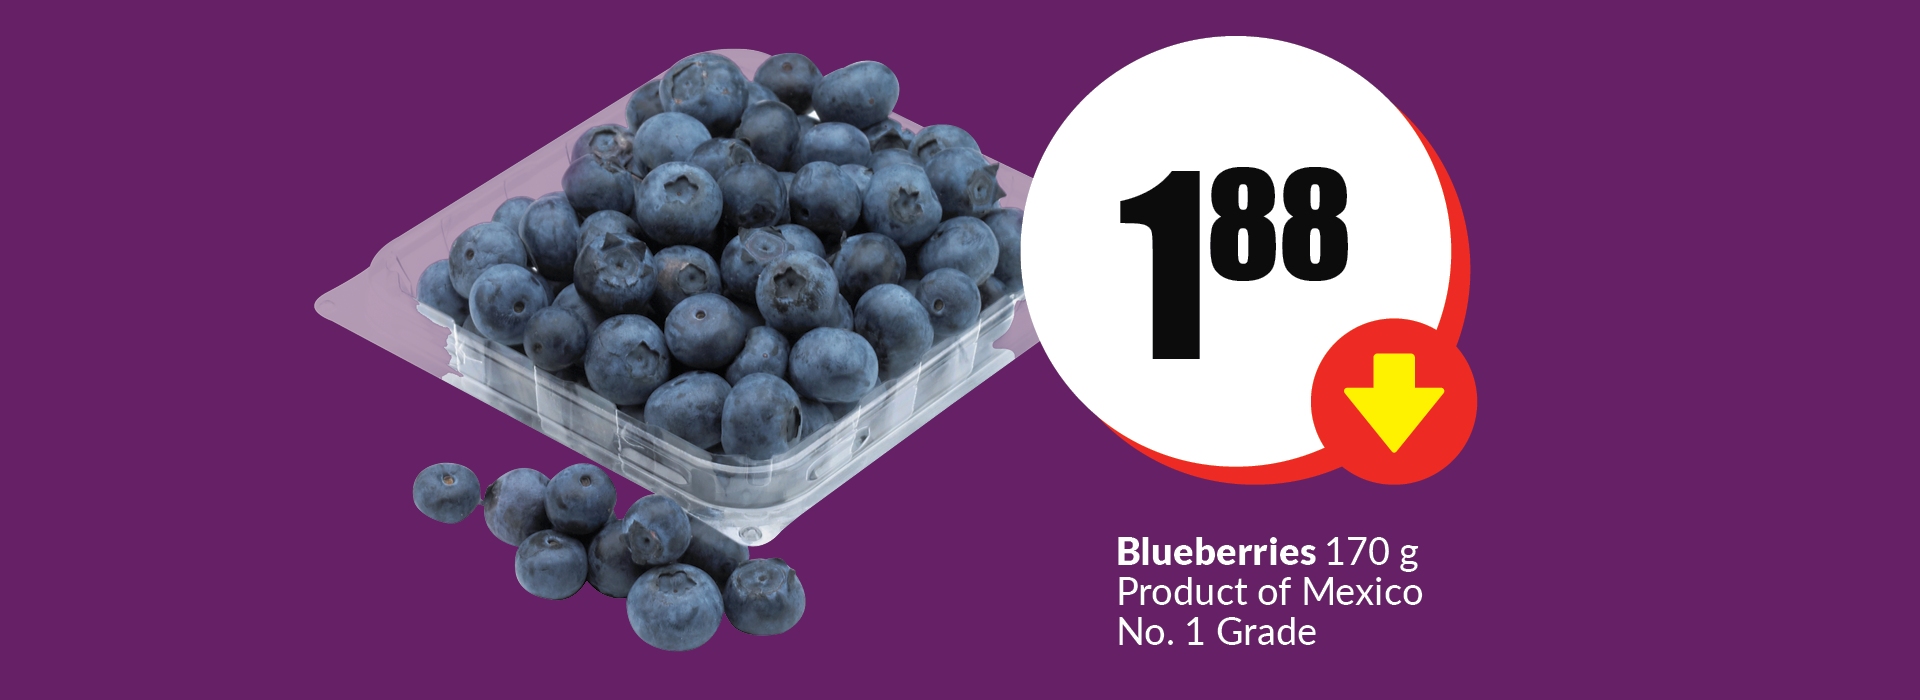 The following image contains the text " Blueberries 170 g product Mexico No. 1 Gread. Get them at $1.88."